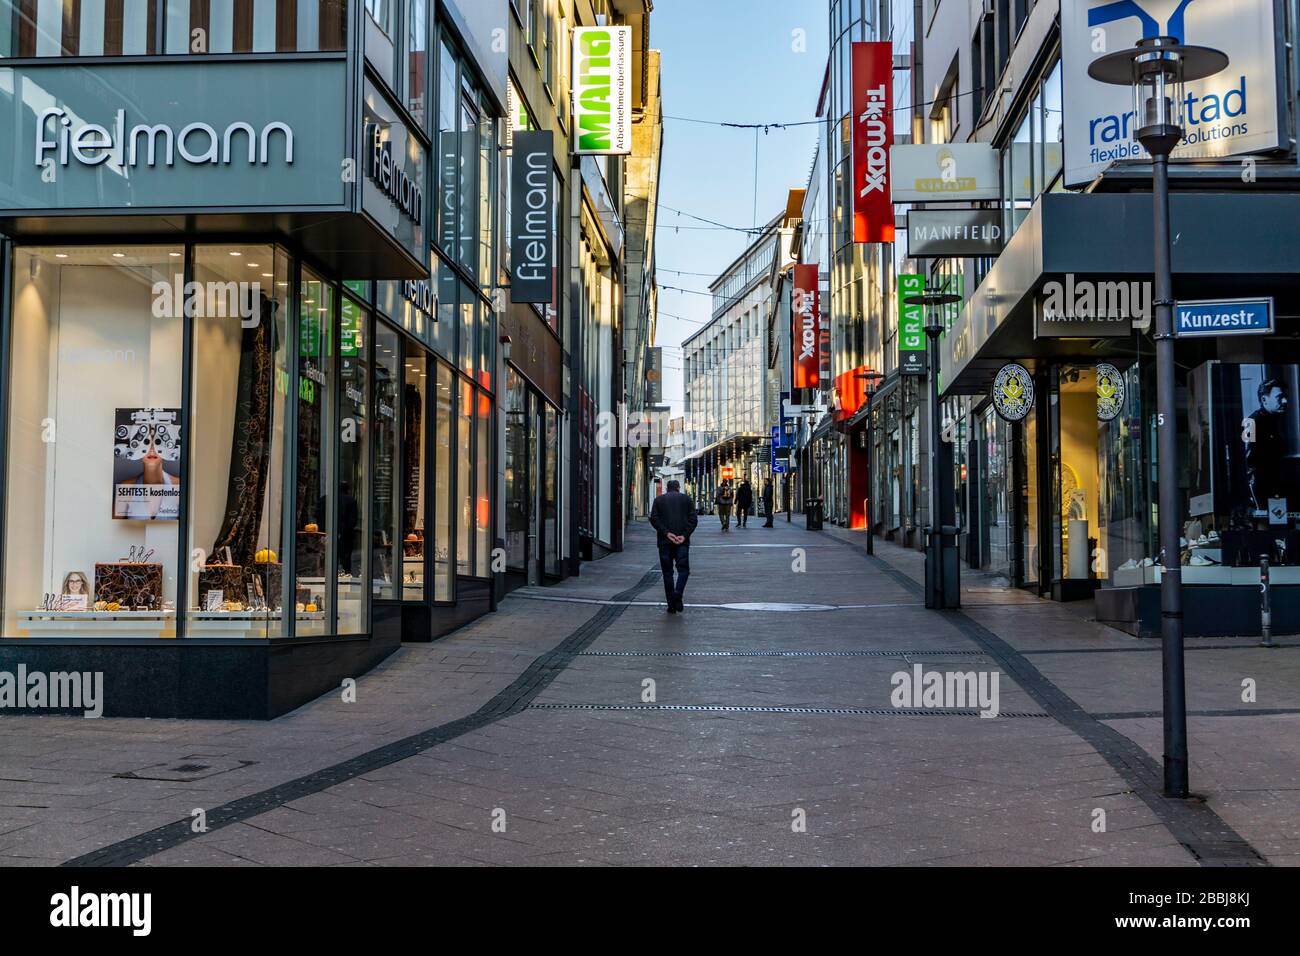 Deserted city centre, pedestrian zone, Limbecker Strasse, effects of the corona crisis in Germany, Essen, Stock Photo